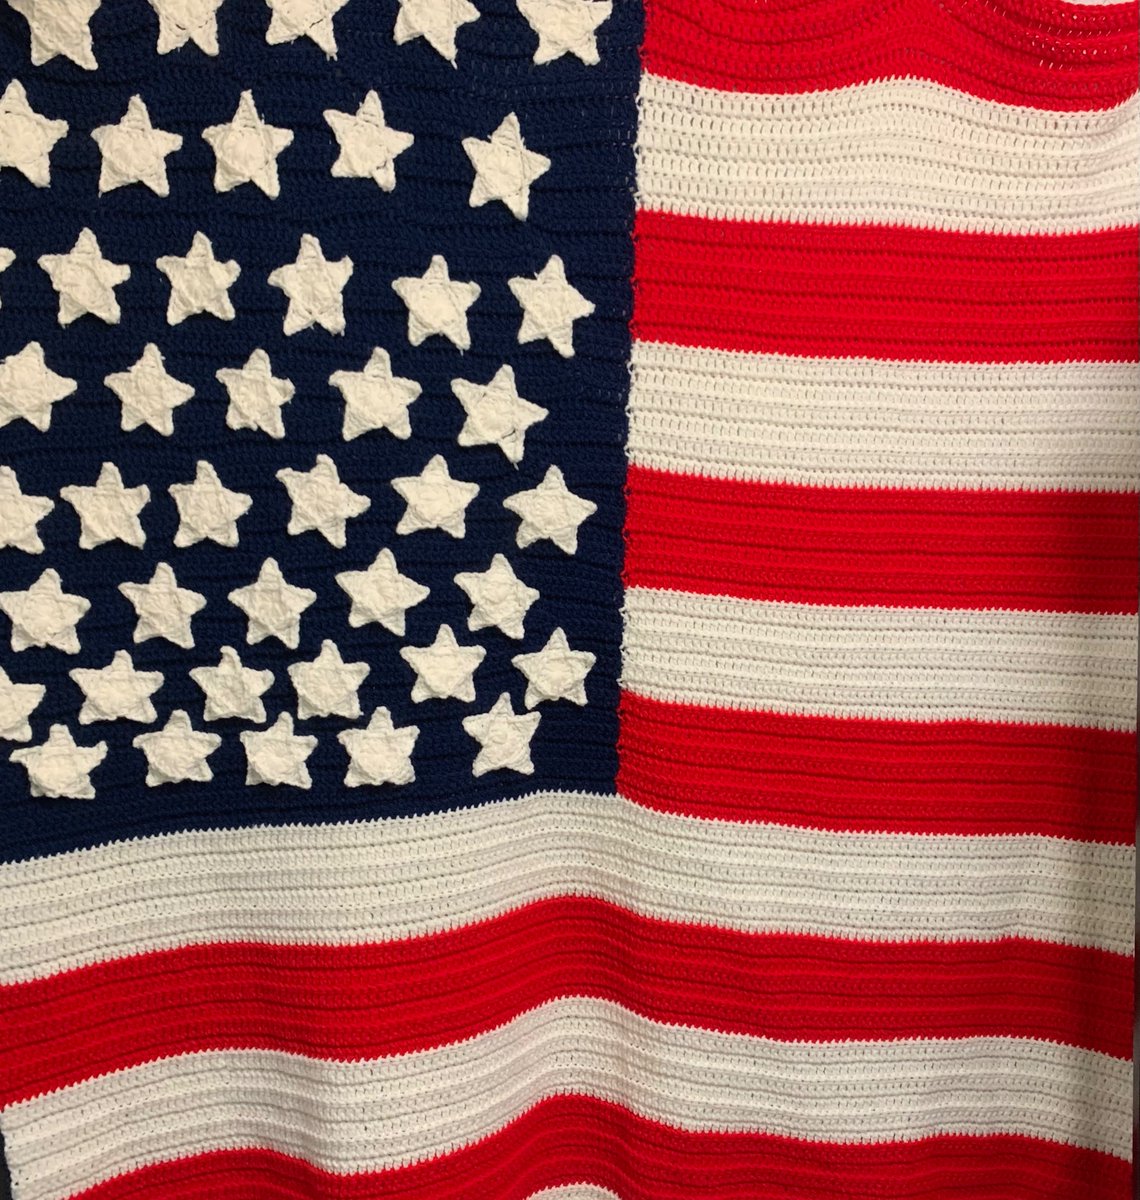 All finished! #handmade #americanflag #stars #stripes #red #white #blue #freedomfighters